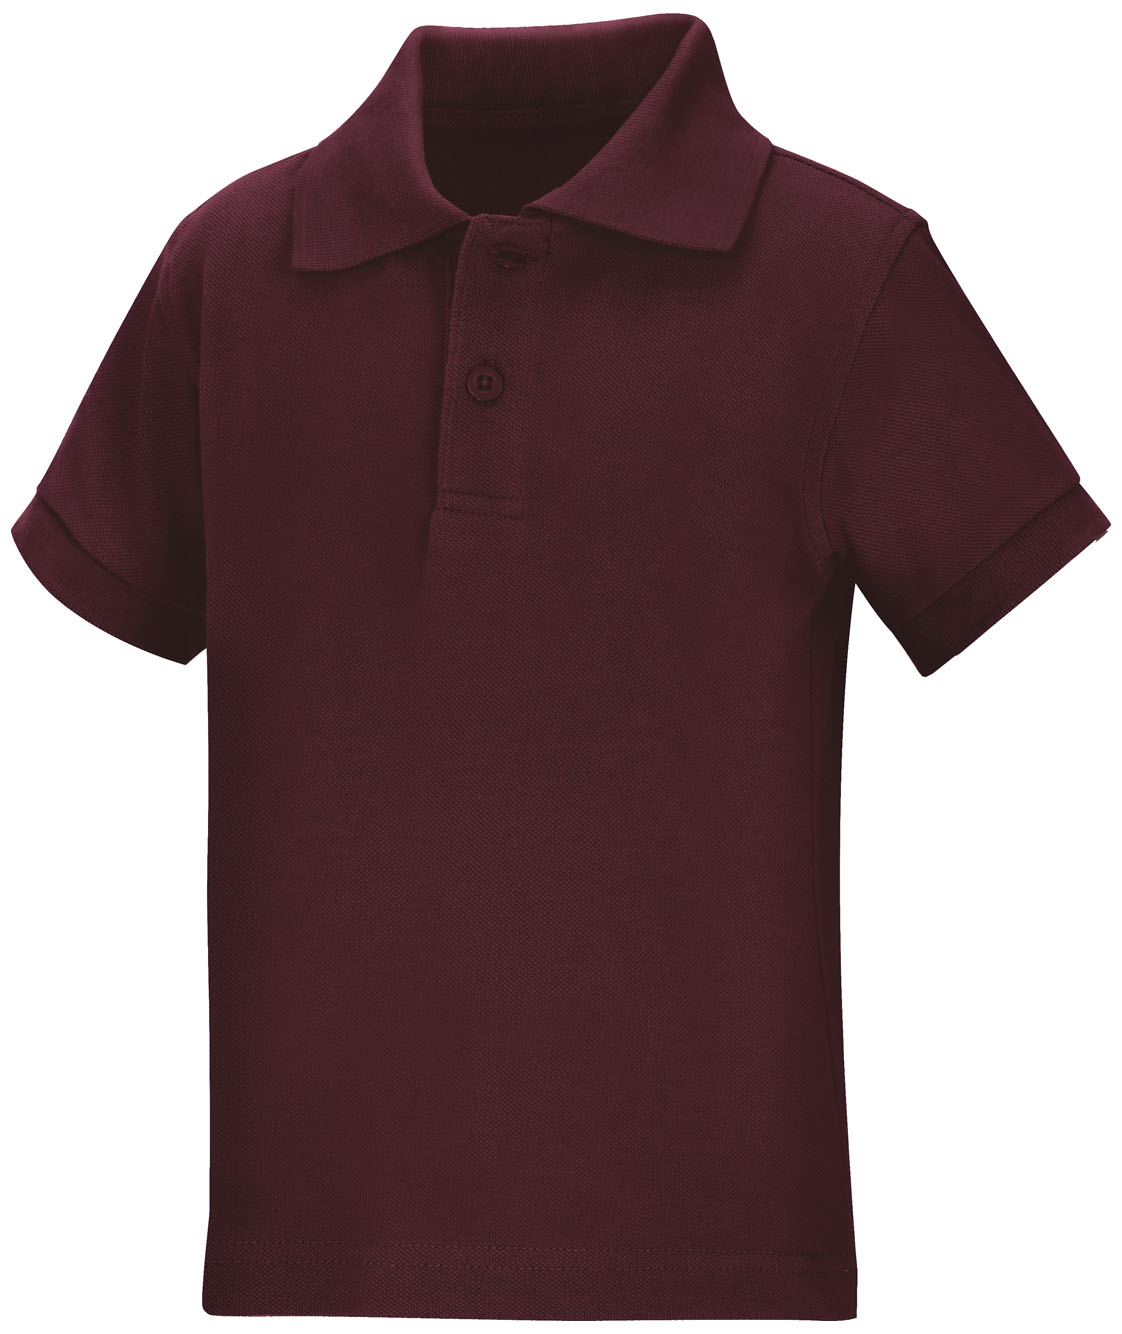 Victory -  UNISEX SHORT SLEEVE  PIQUE POLO 5832 - Growing Kids